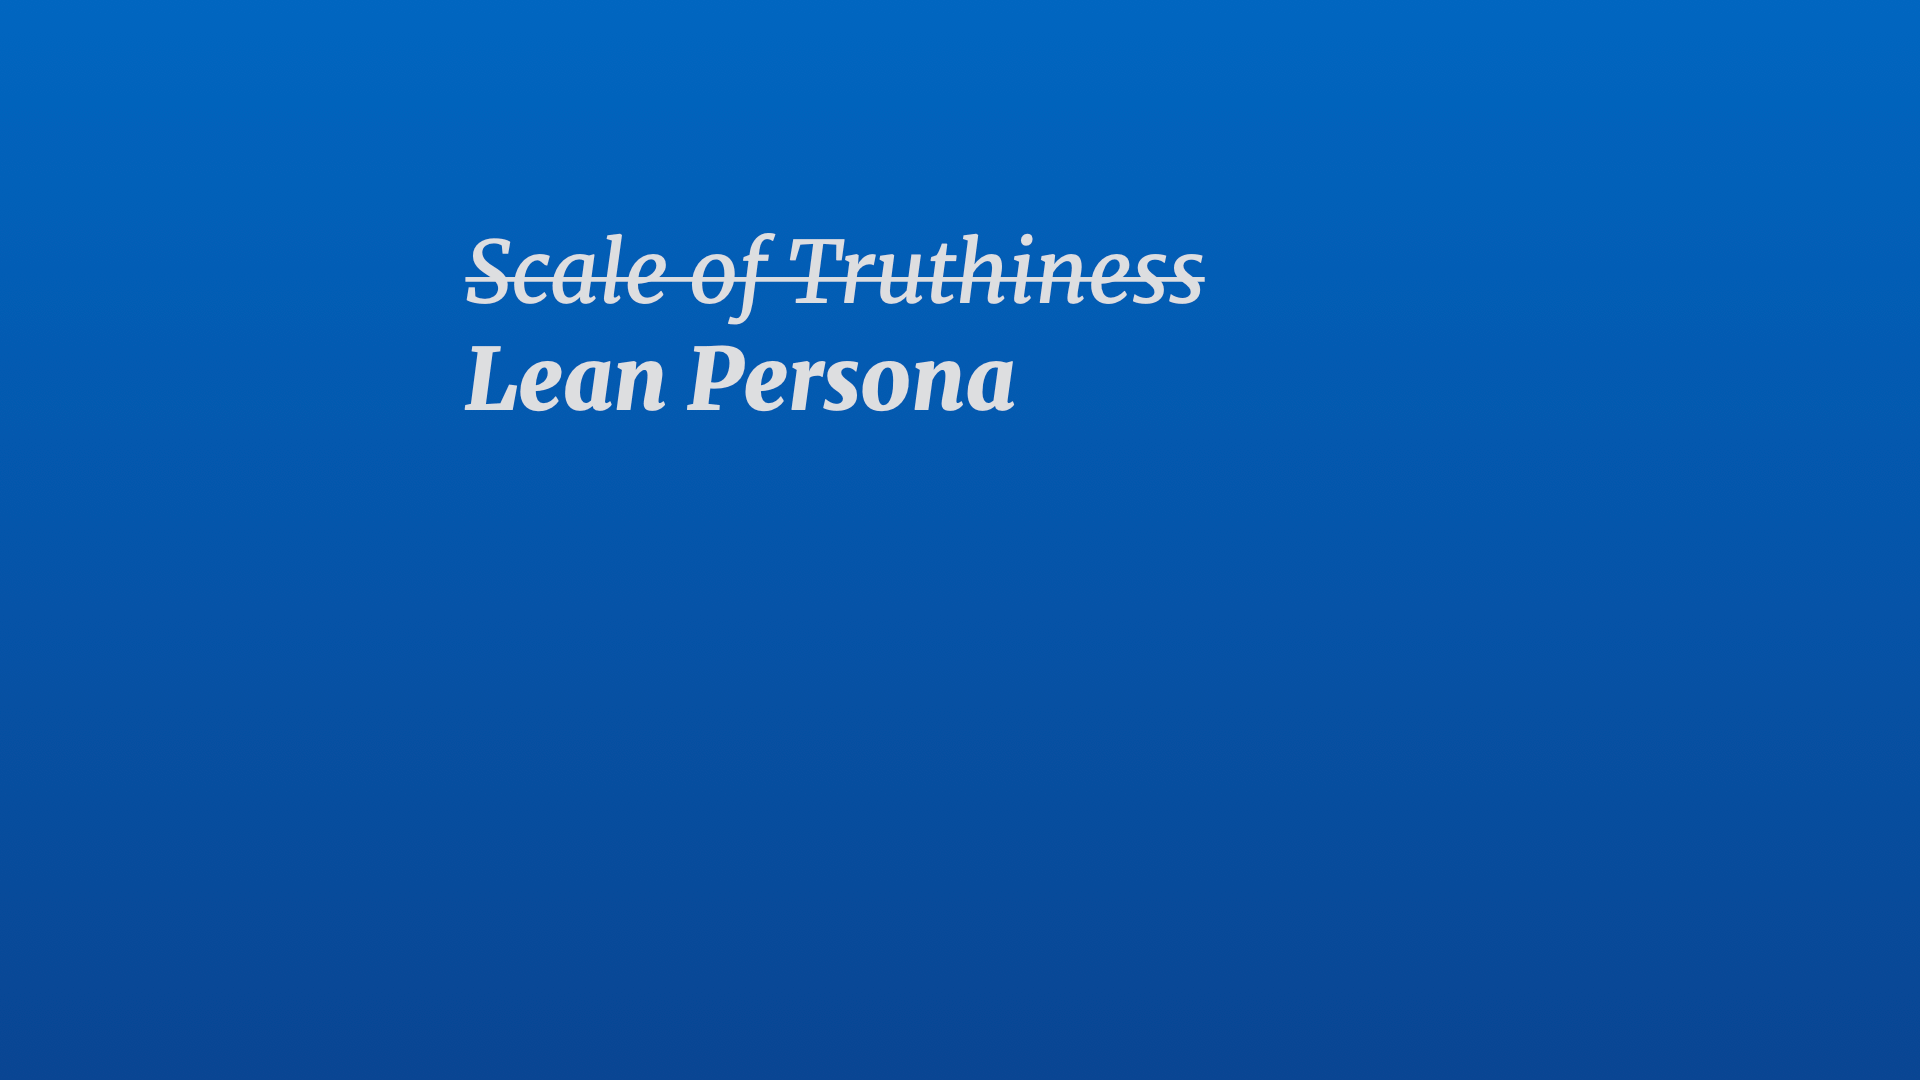 Text title: Lean Persona (underneath the crossed-out title 'Scale of Truthiness')